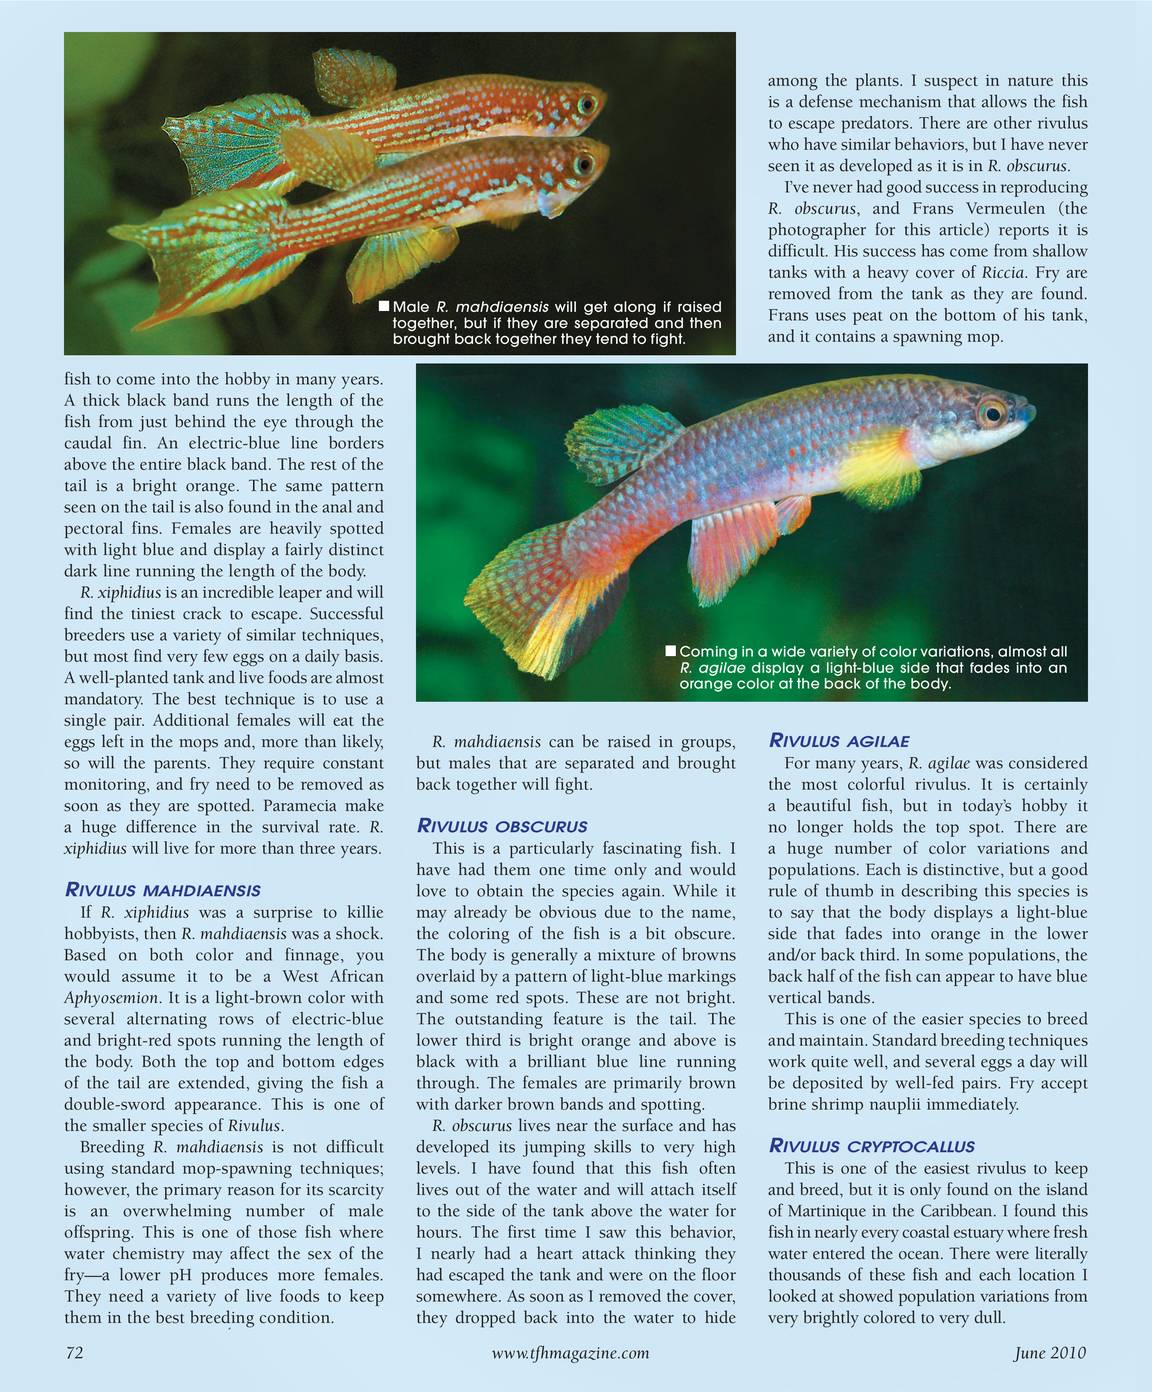 Tropical Fish Hobbyist - June 2010 - page 72